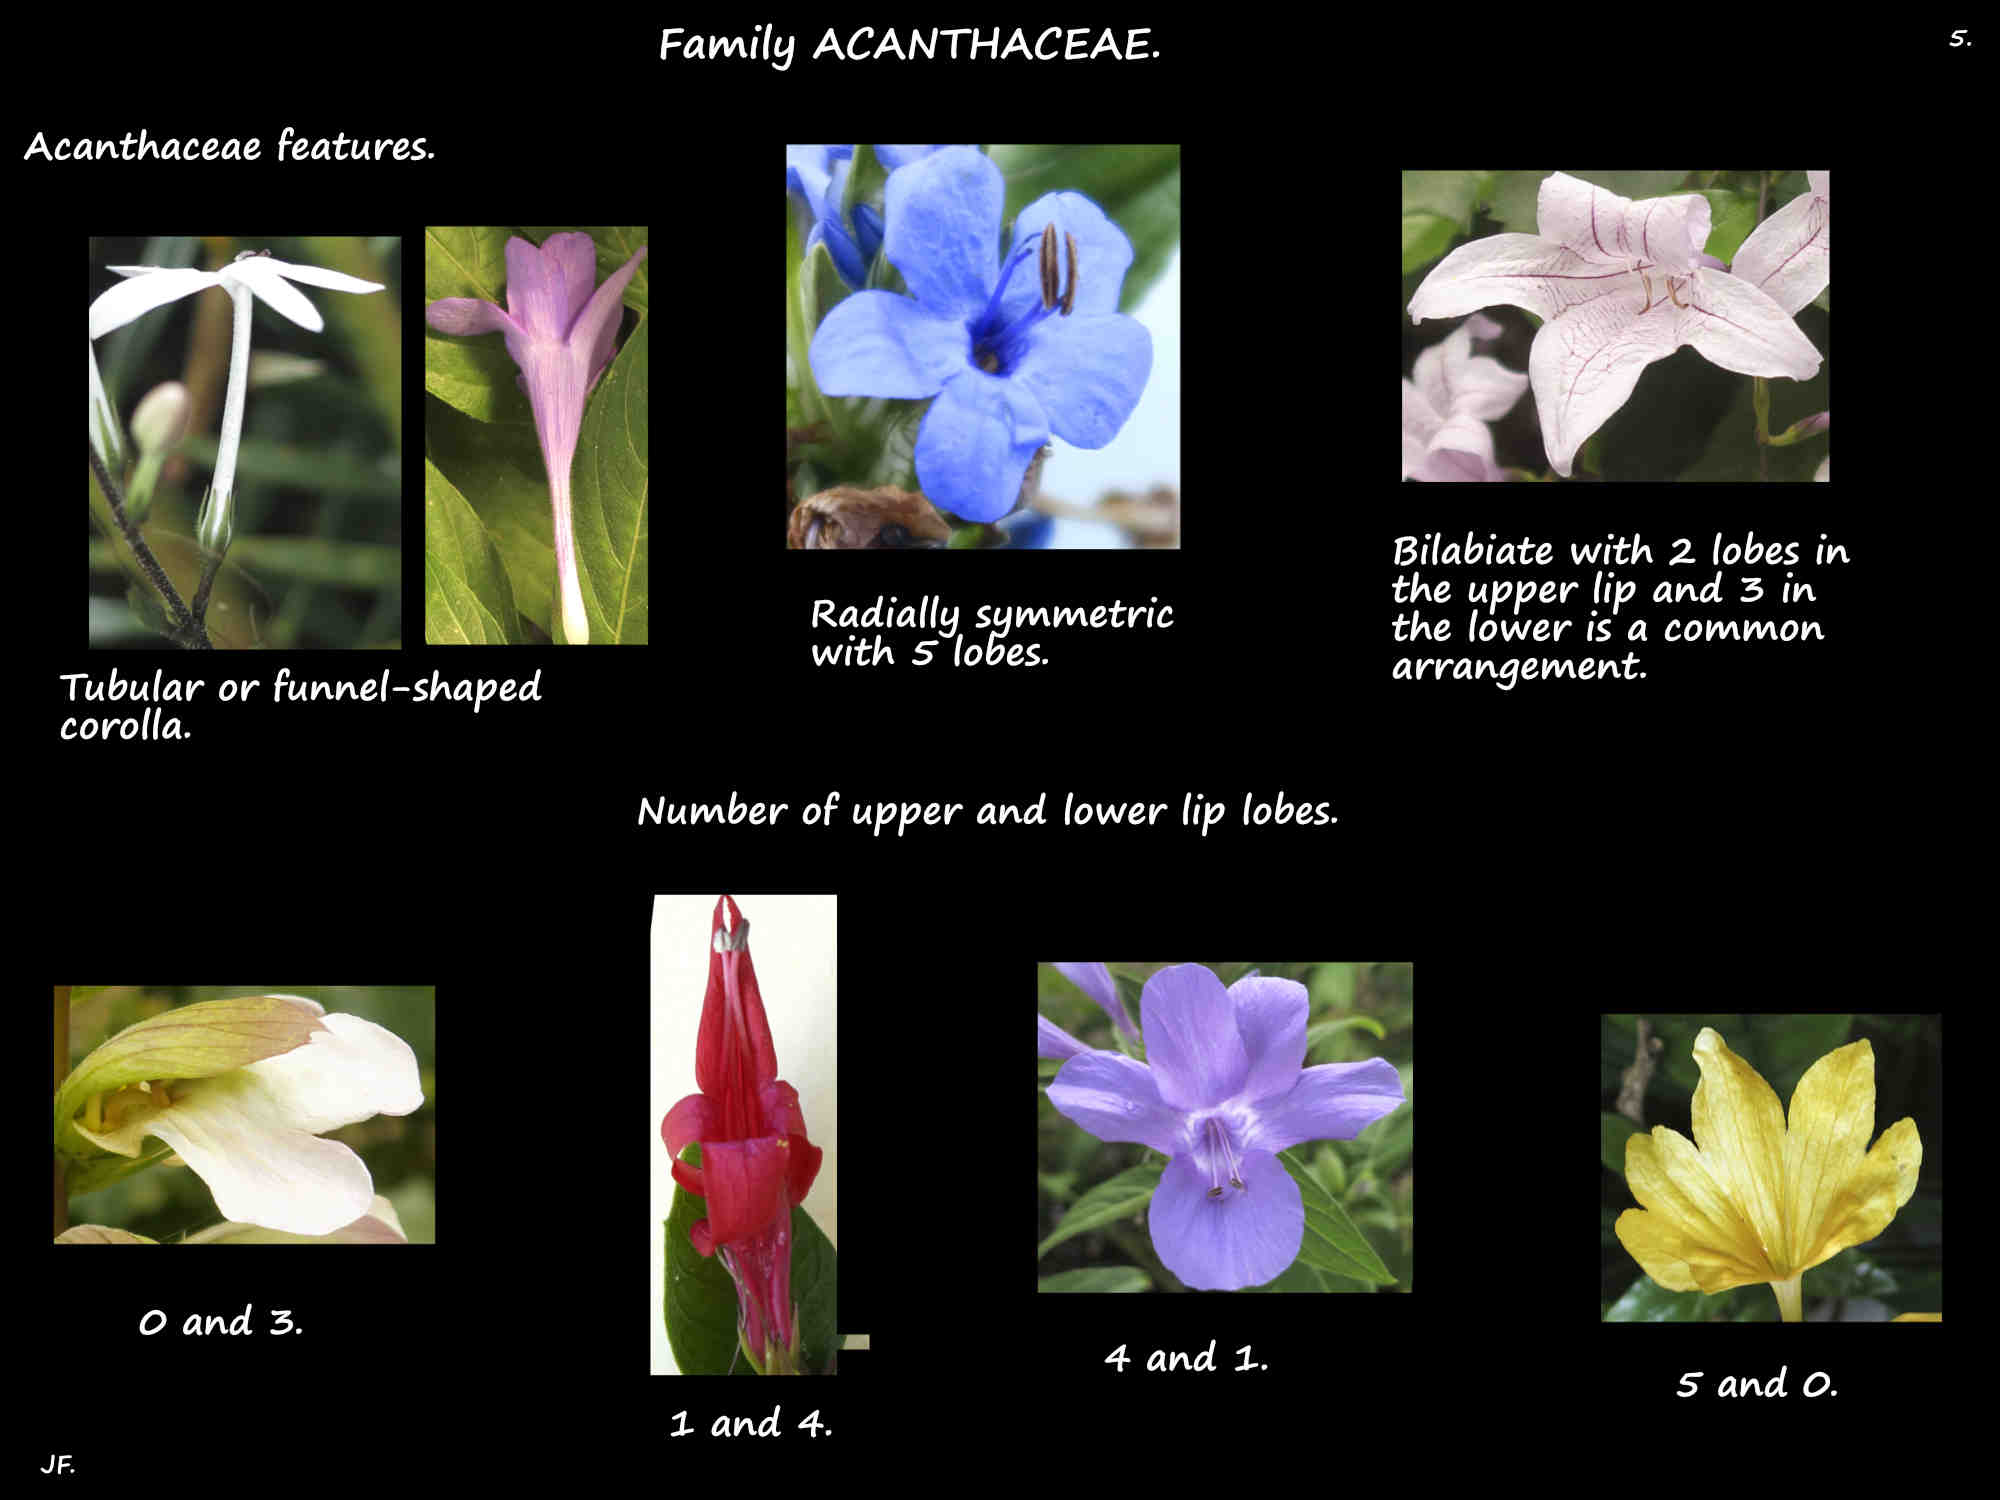 5 Types of Acanthaceae corollas